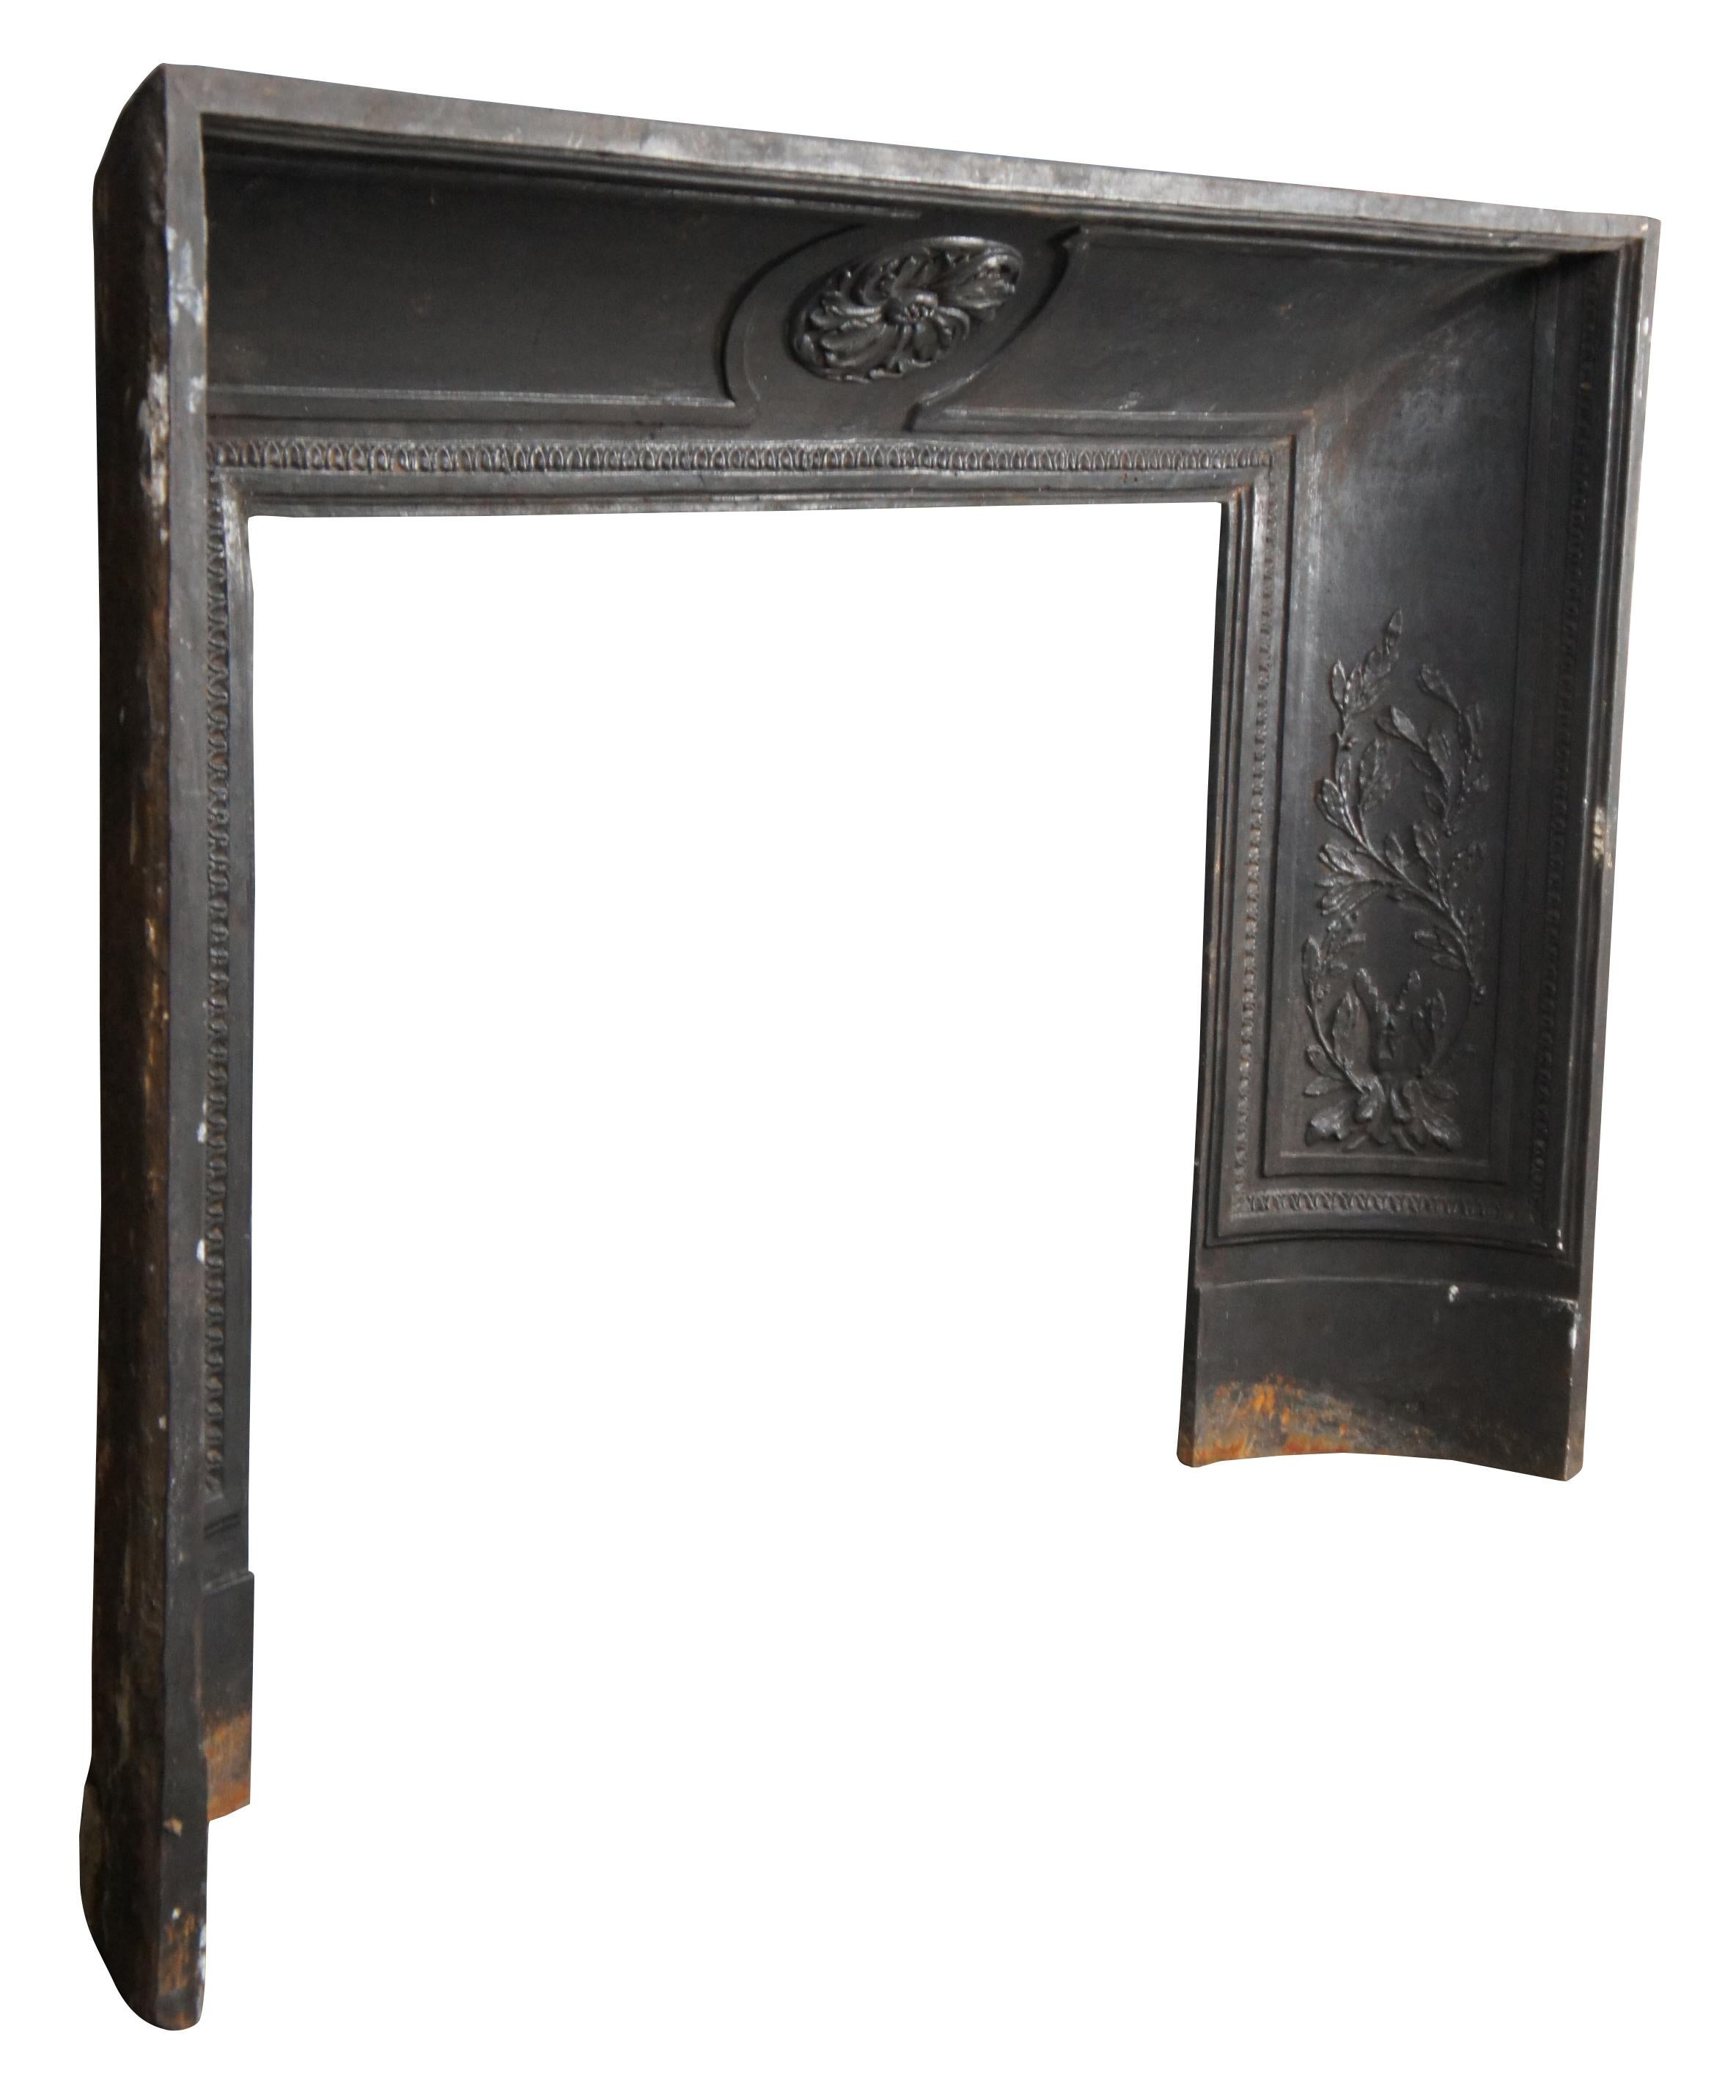 An impressive mid 19th century French cast iron fireplace insert or surround. A deep concave form with ornate detail. The insert is centered by a chrysanthemum medallion and features venus fly catchers along the sides set within intertwined foliate.